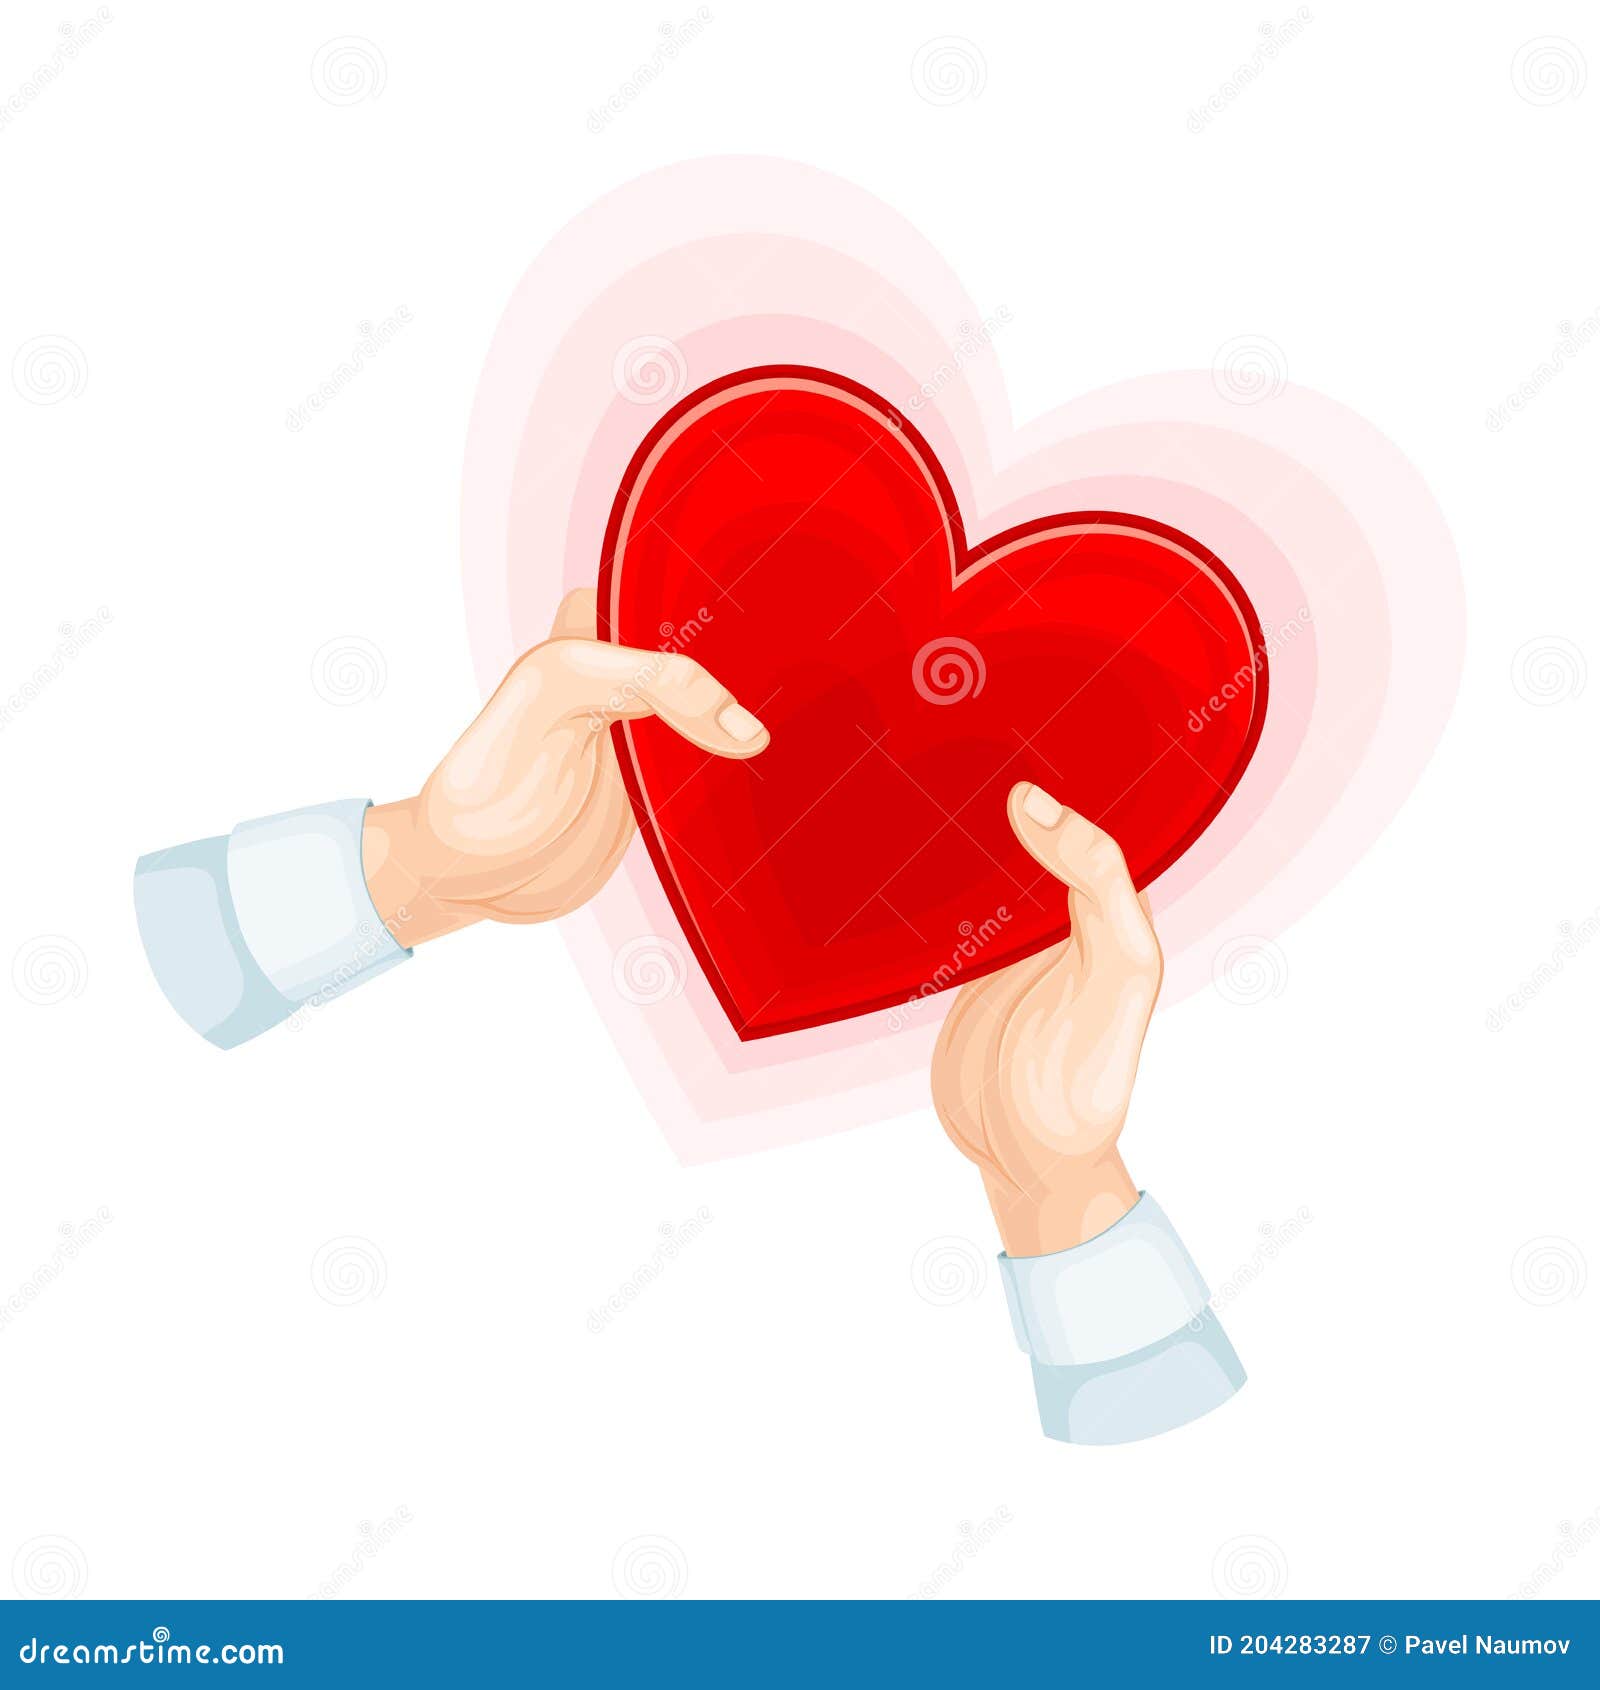 bright red heart  in hands as love and fondness   